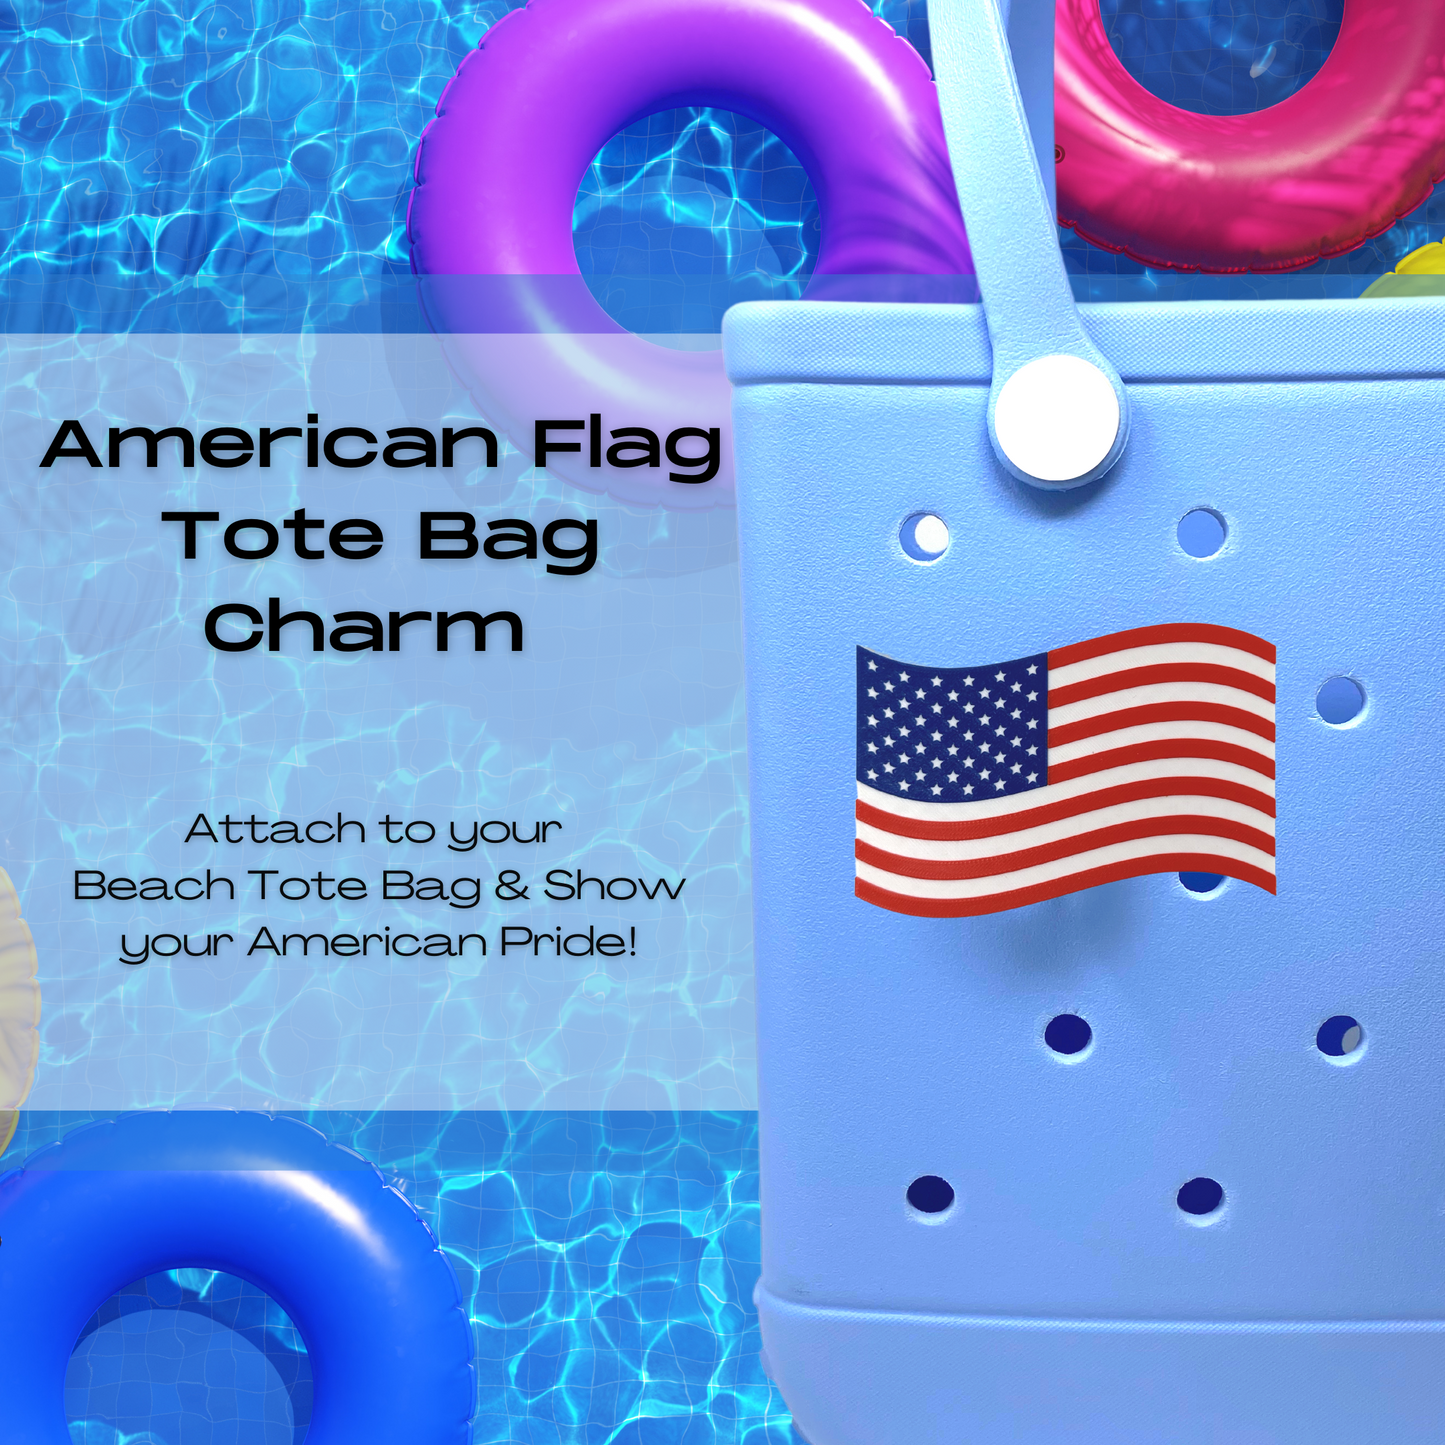 USA Flag Charms - Decorative Charms for Displaying Patriotism - Compatible with Bogg Bags, Simply Southern and other Tote Bags